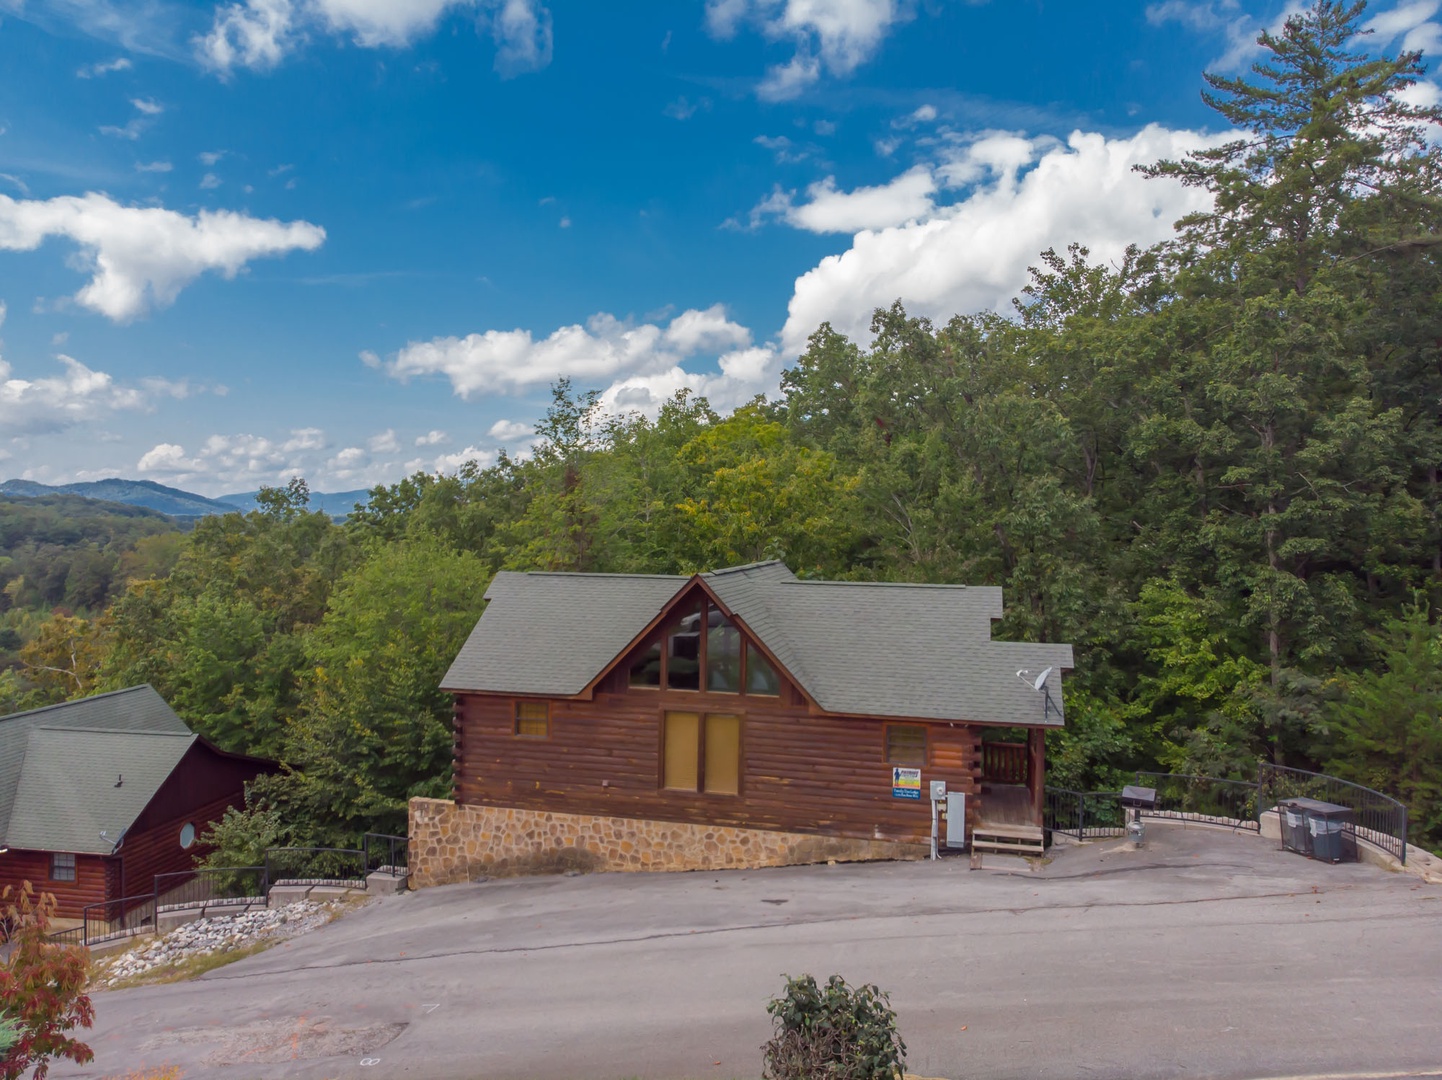 Exterior view of Family Ties Lodge, a 4 bedroom cabin rental located in pigeon forge